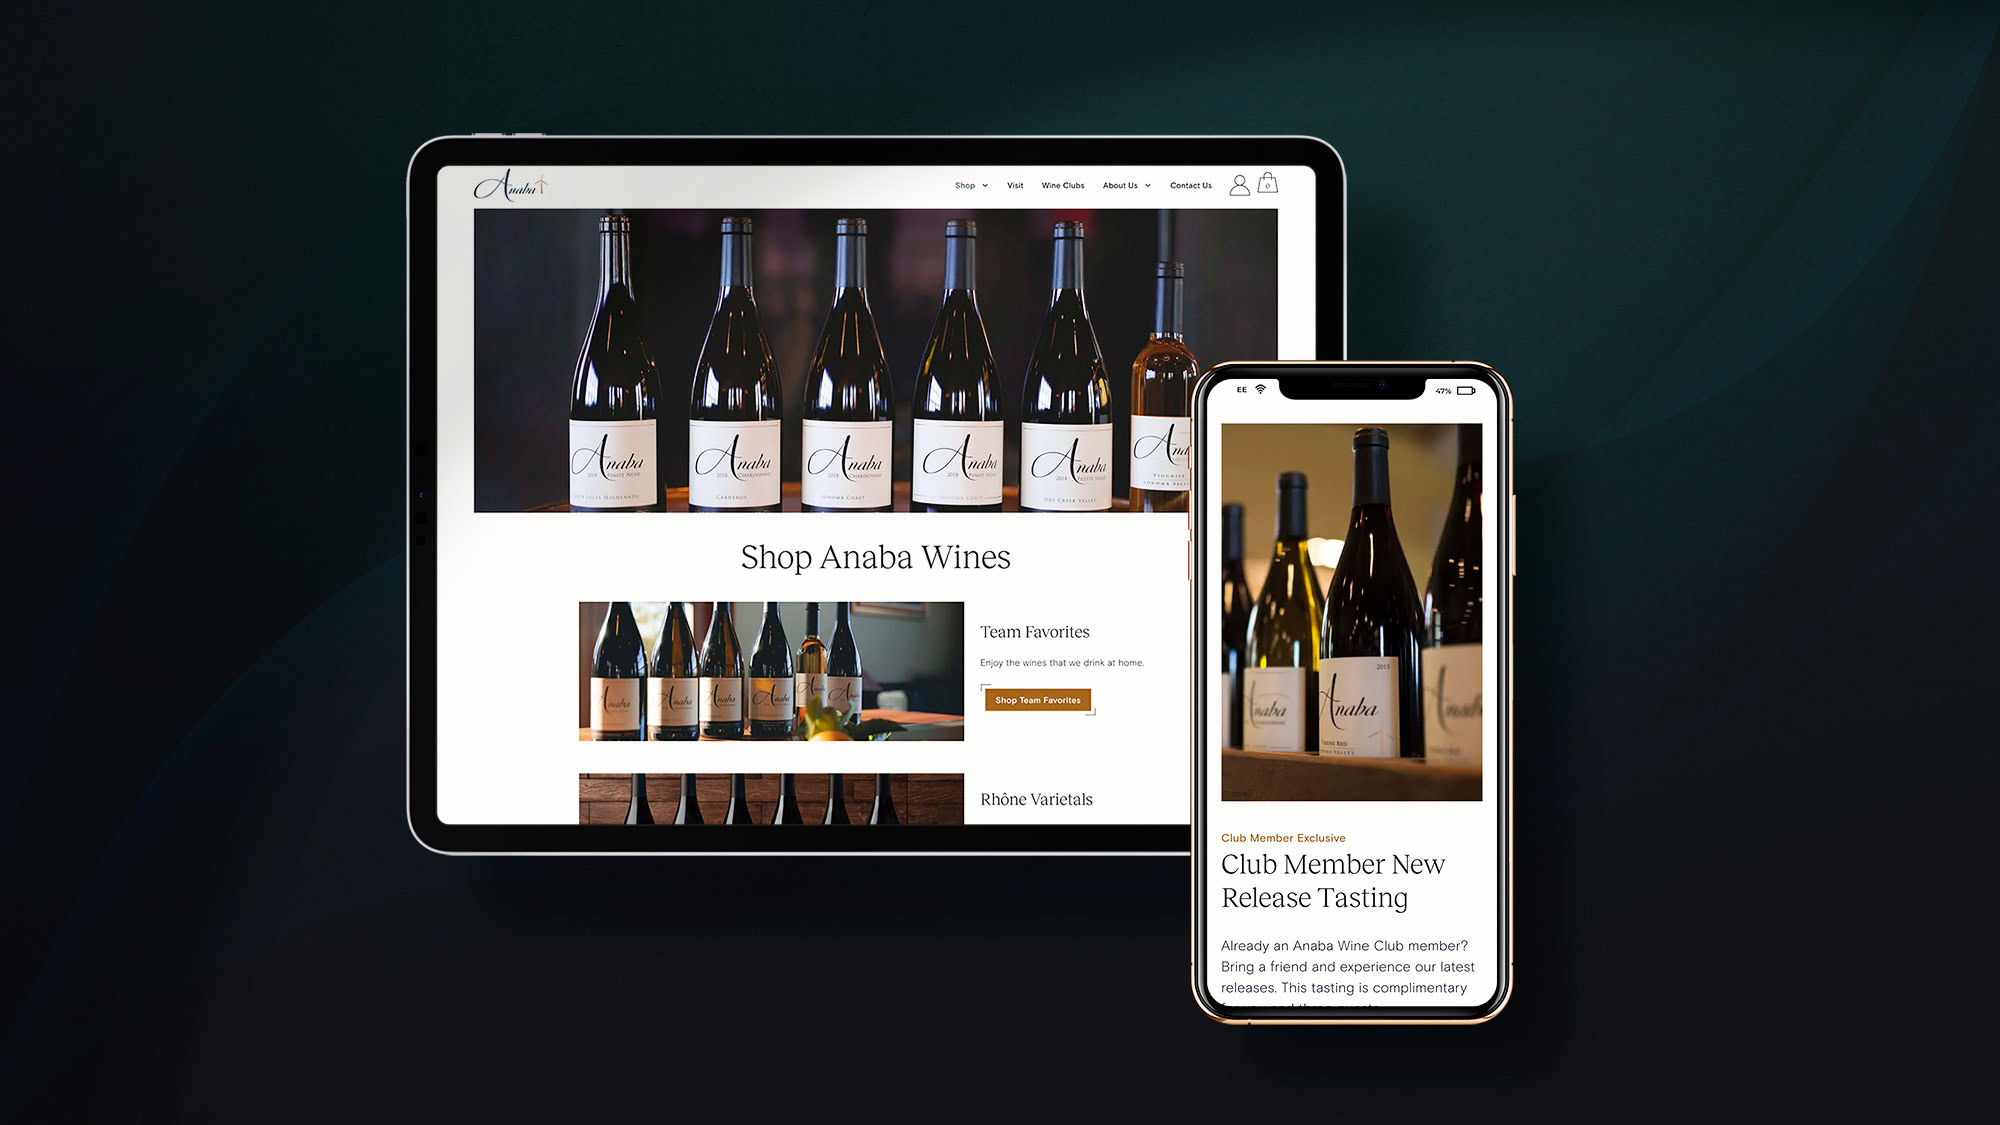 A mockup showing the Anaba Wines website on 2 devices to demonstrate responsiveness.